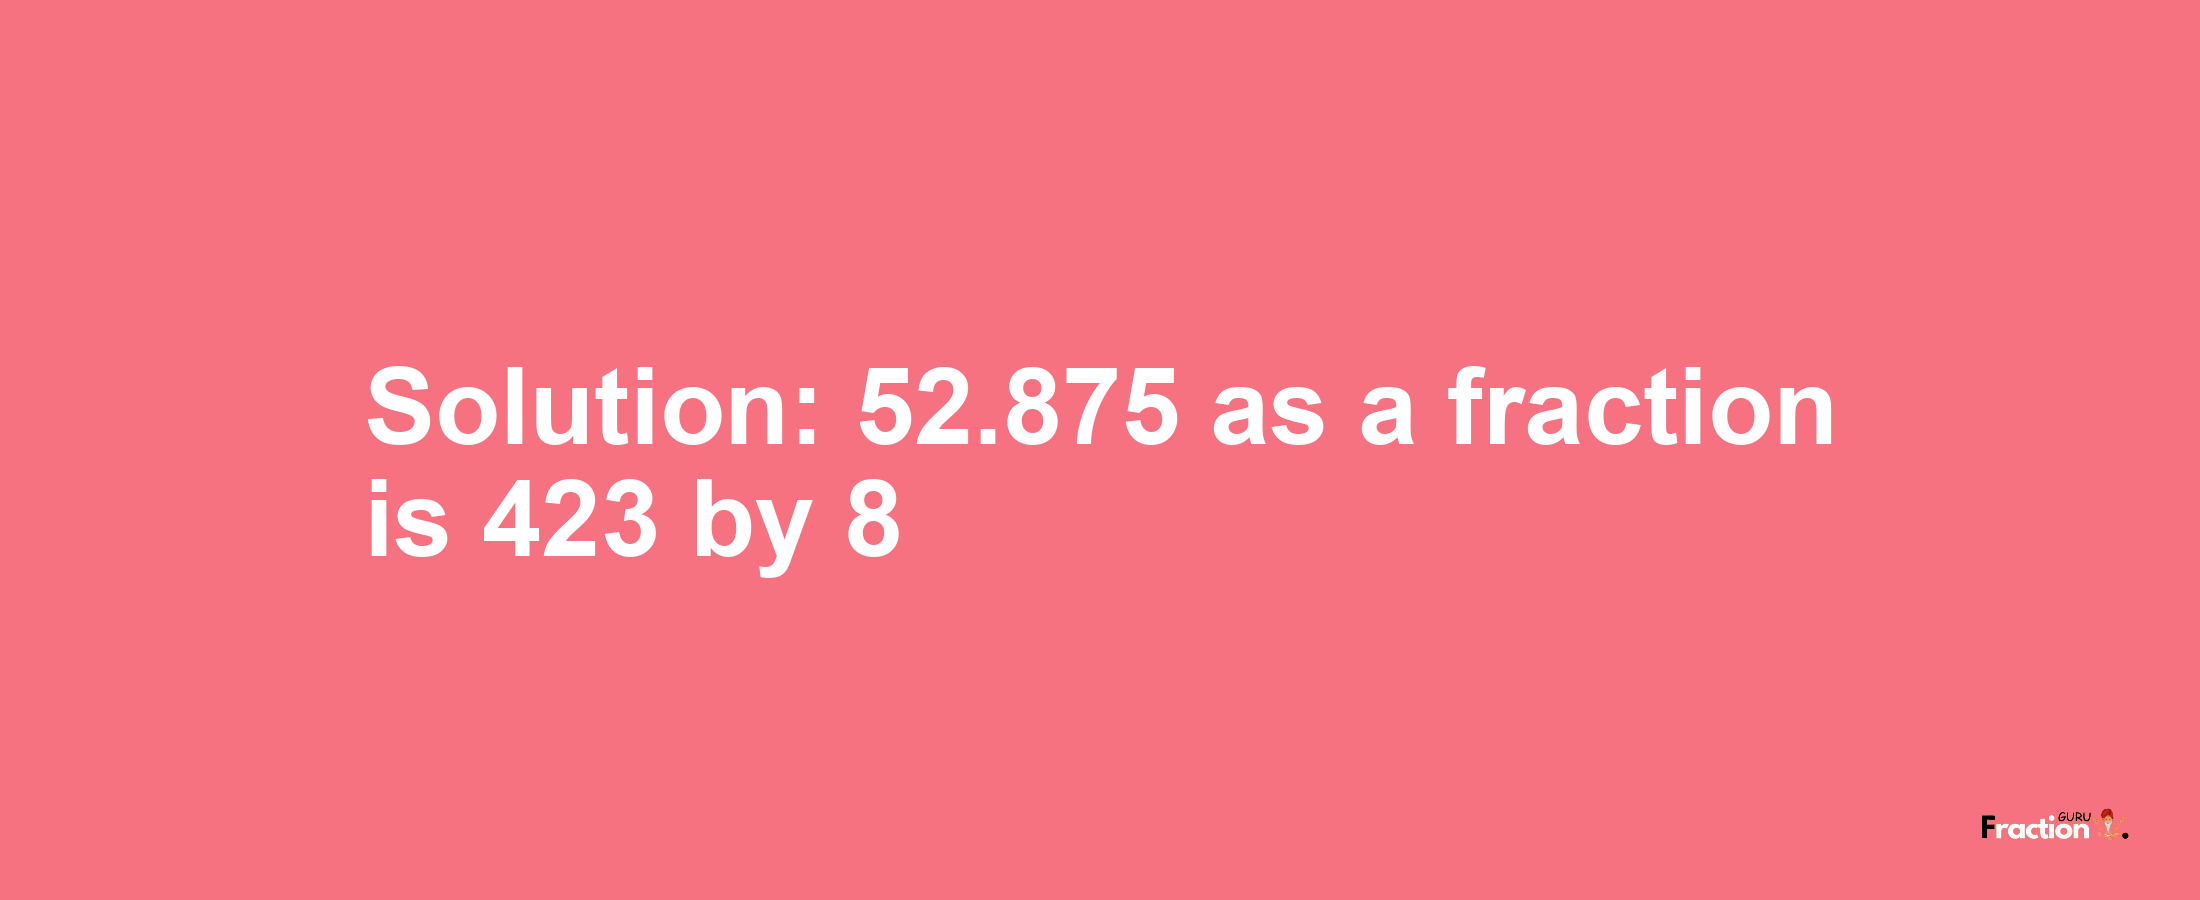 Solution:52.875 as a fraction is 423/8